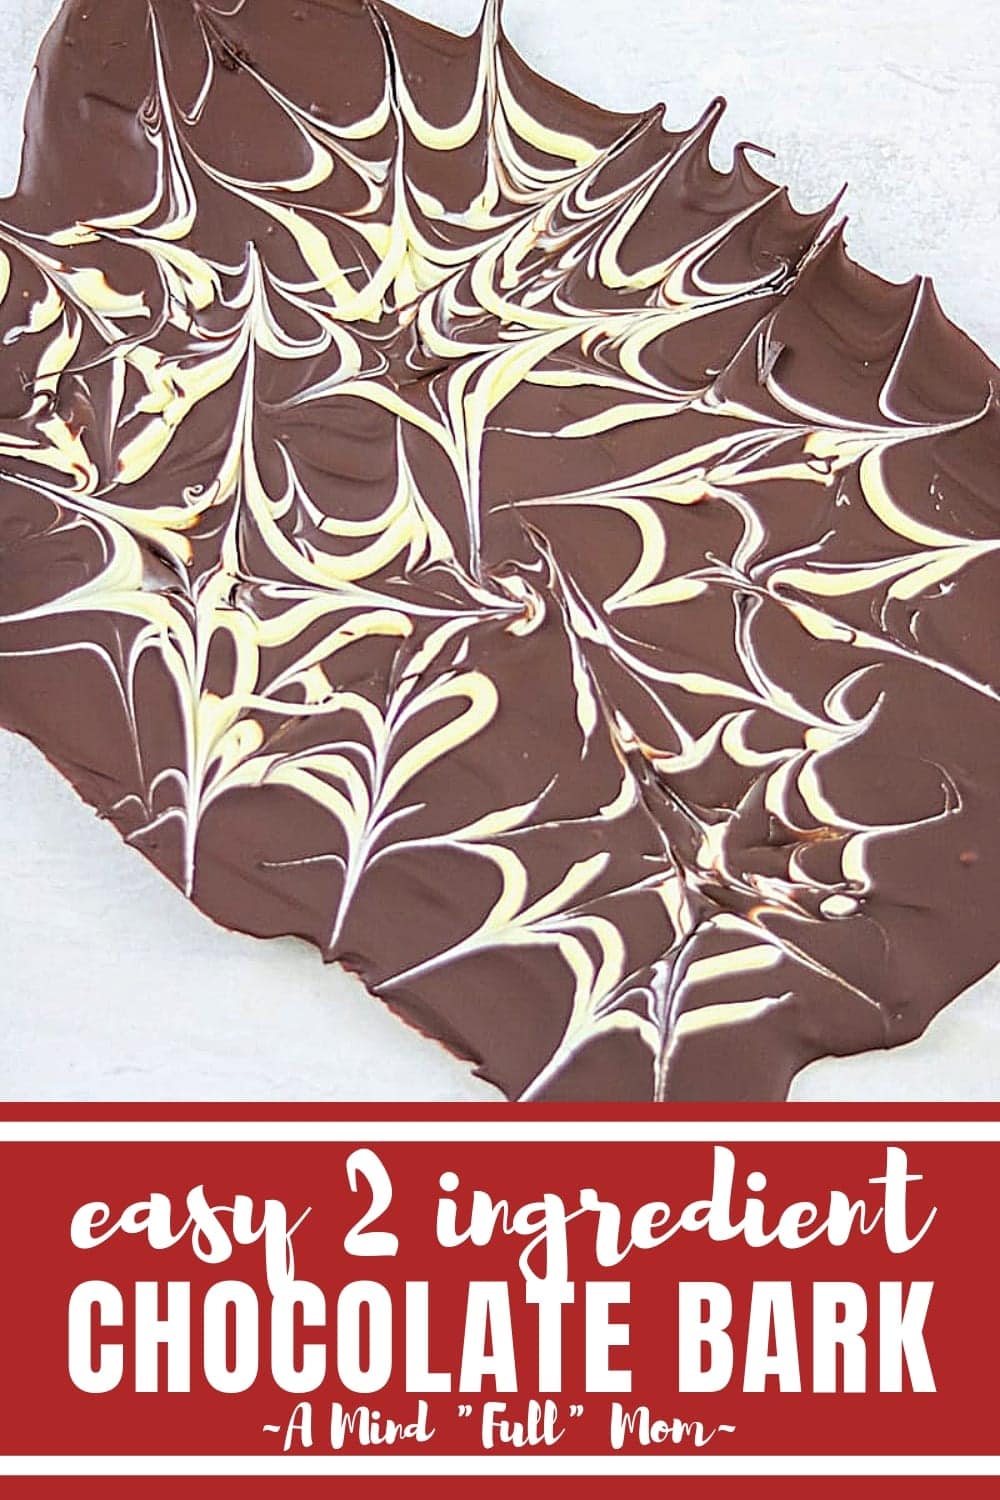 It is so easy to make chocolate bark at home with only 2 ingredients! This easy recipe for chocolate bark produces a marbled bark that is so delicious and pretty! It is a great recipe to make to give to friends, or to just enjoy as a decadent treat. 